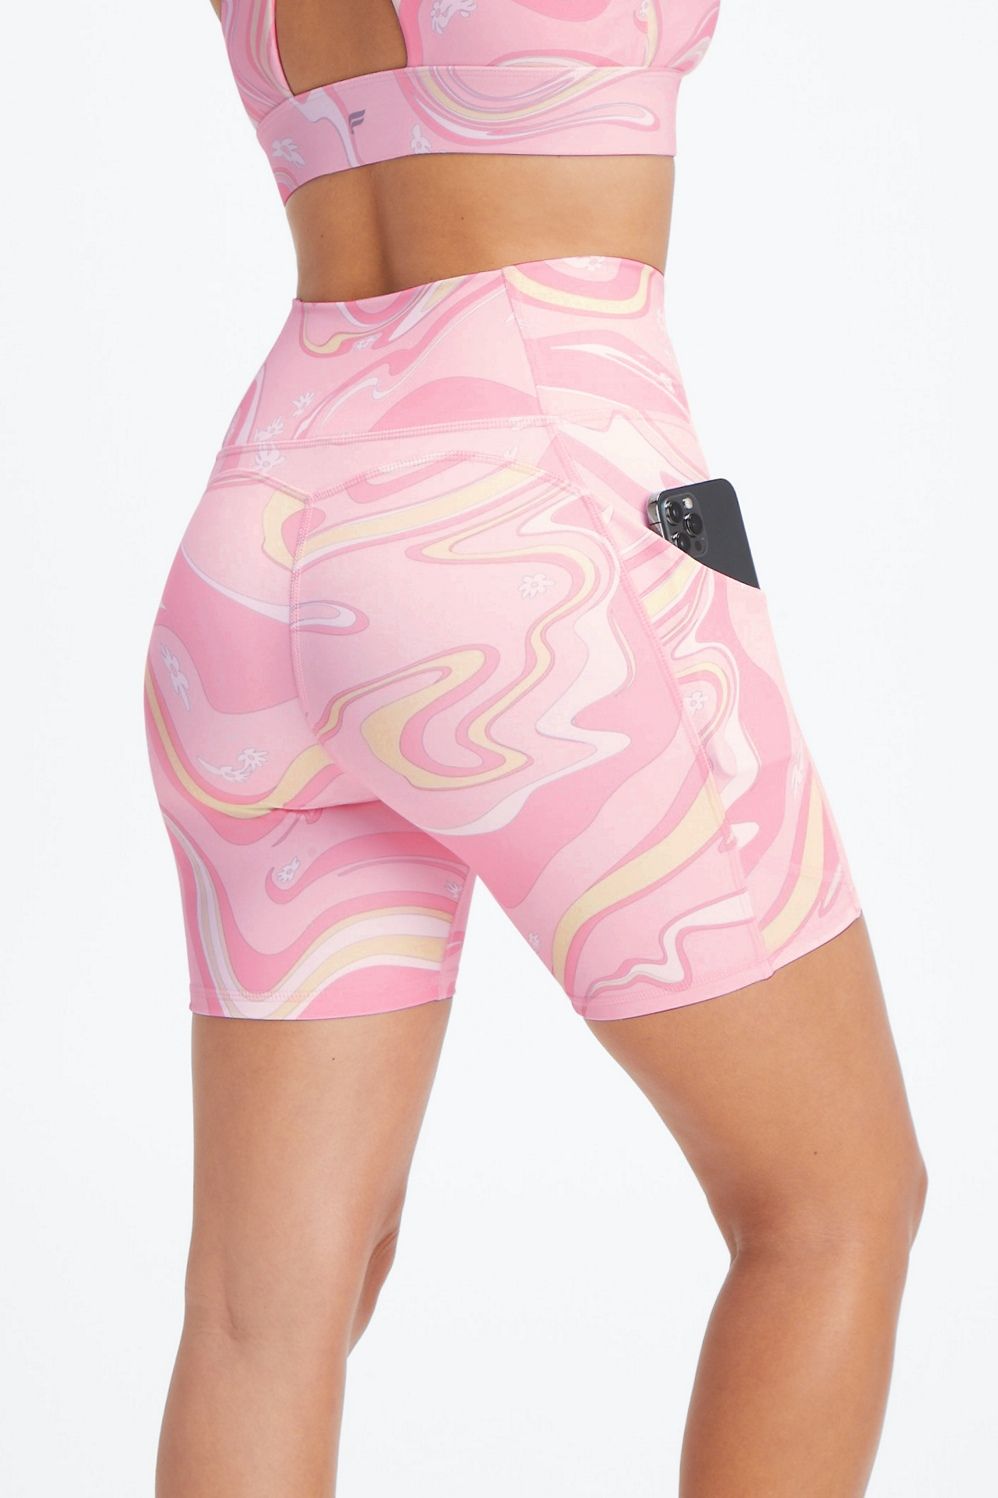 Oasis High-Waisted 6'' Short | Fabletics - North America